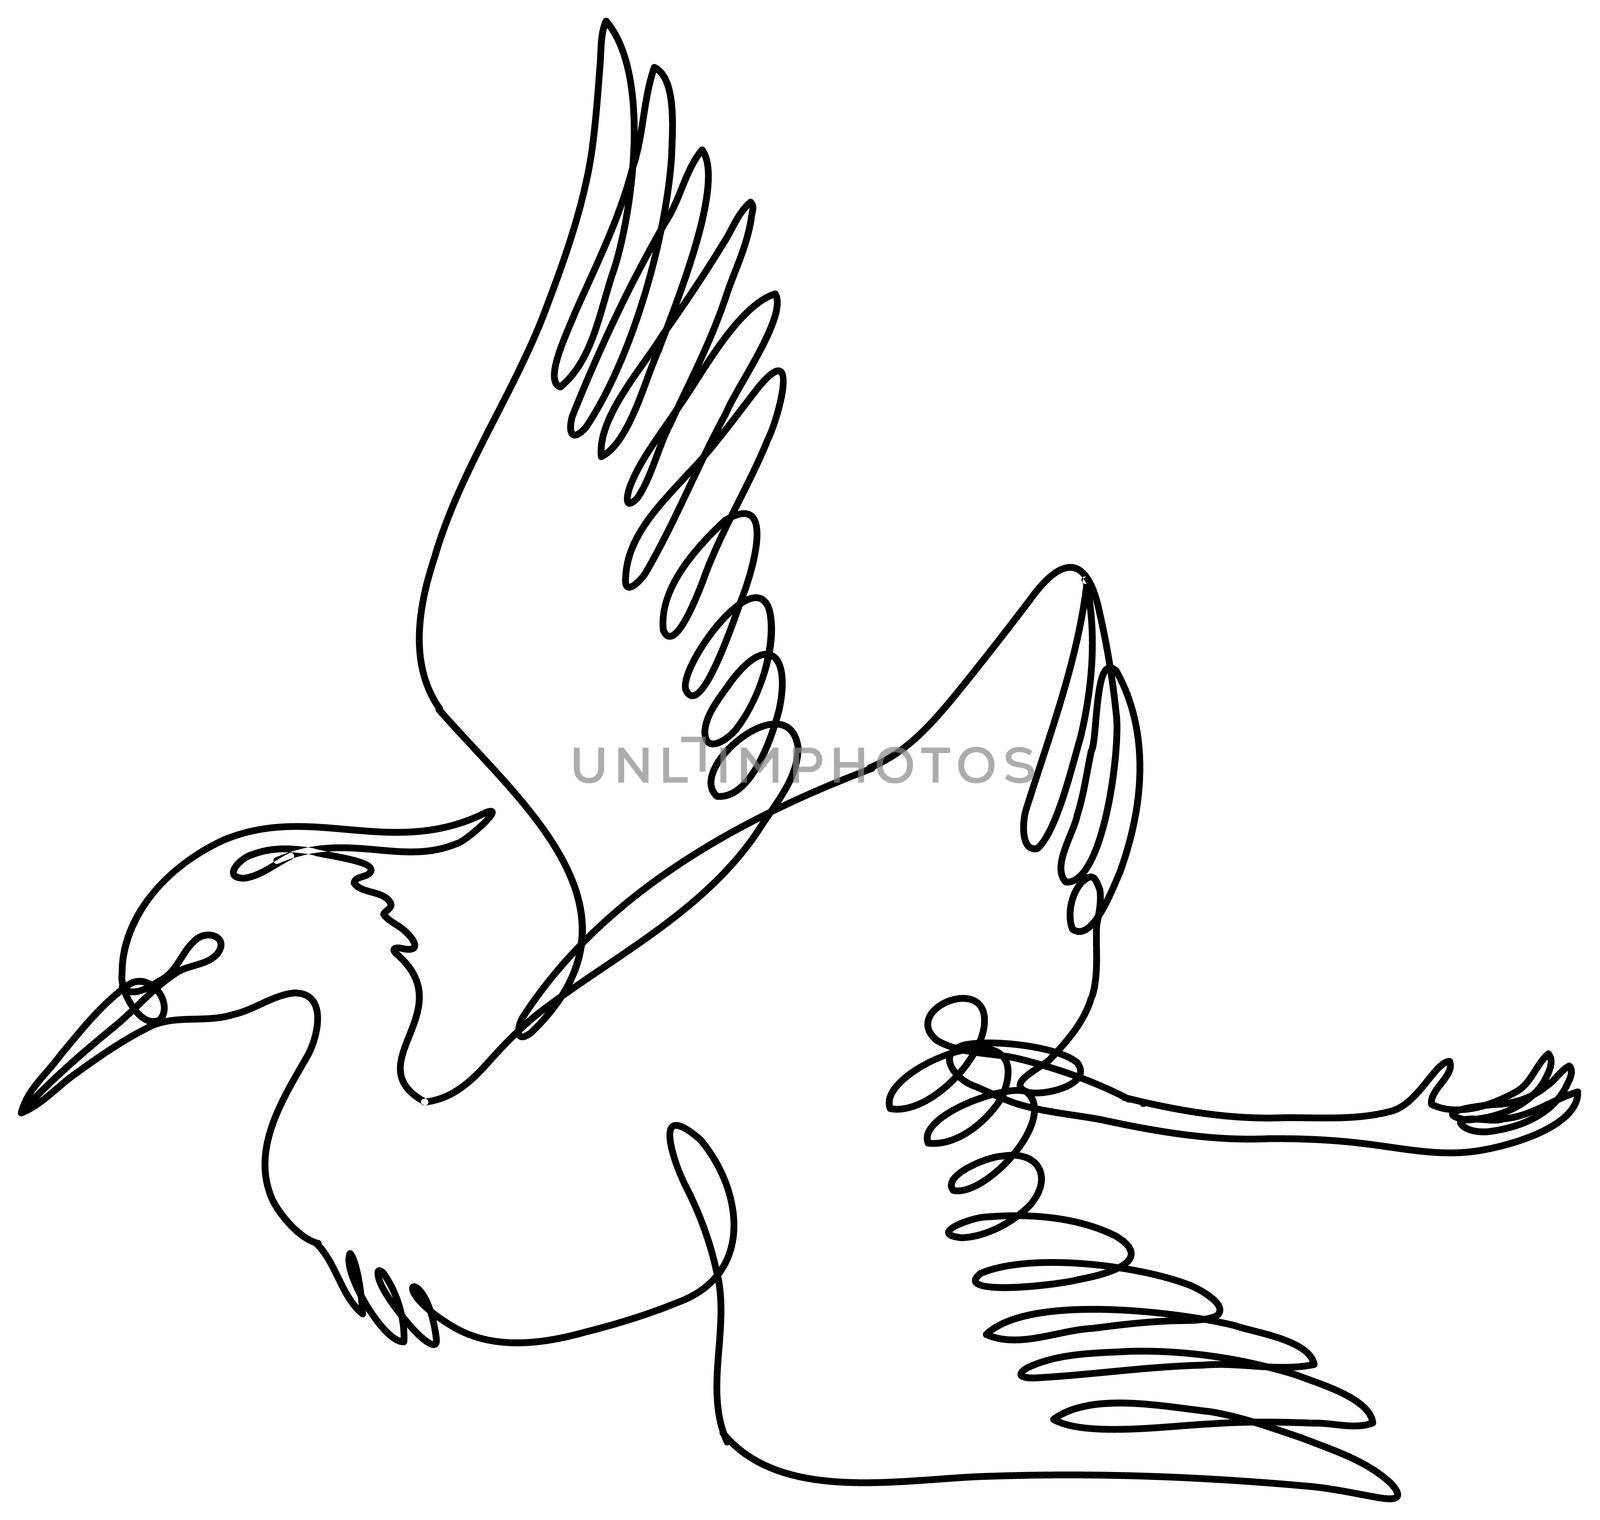 Continuous line drawing illustration of a crane flying side view done in mono line or doodle style in black and white on isolated background. 